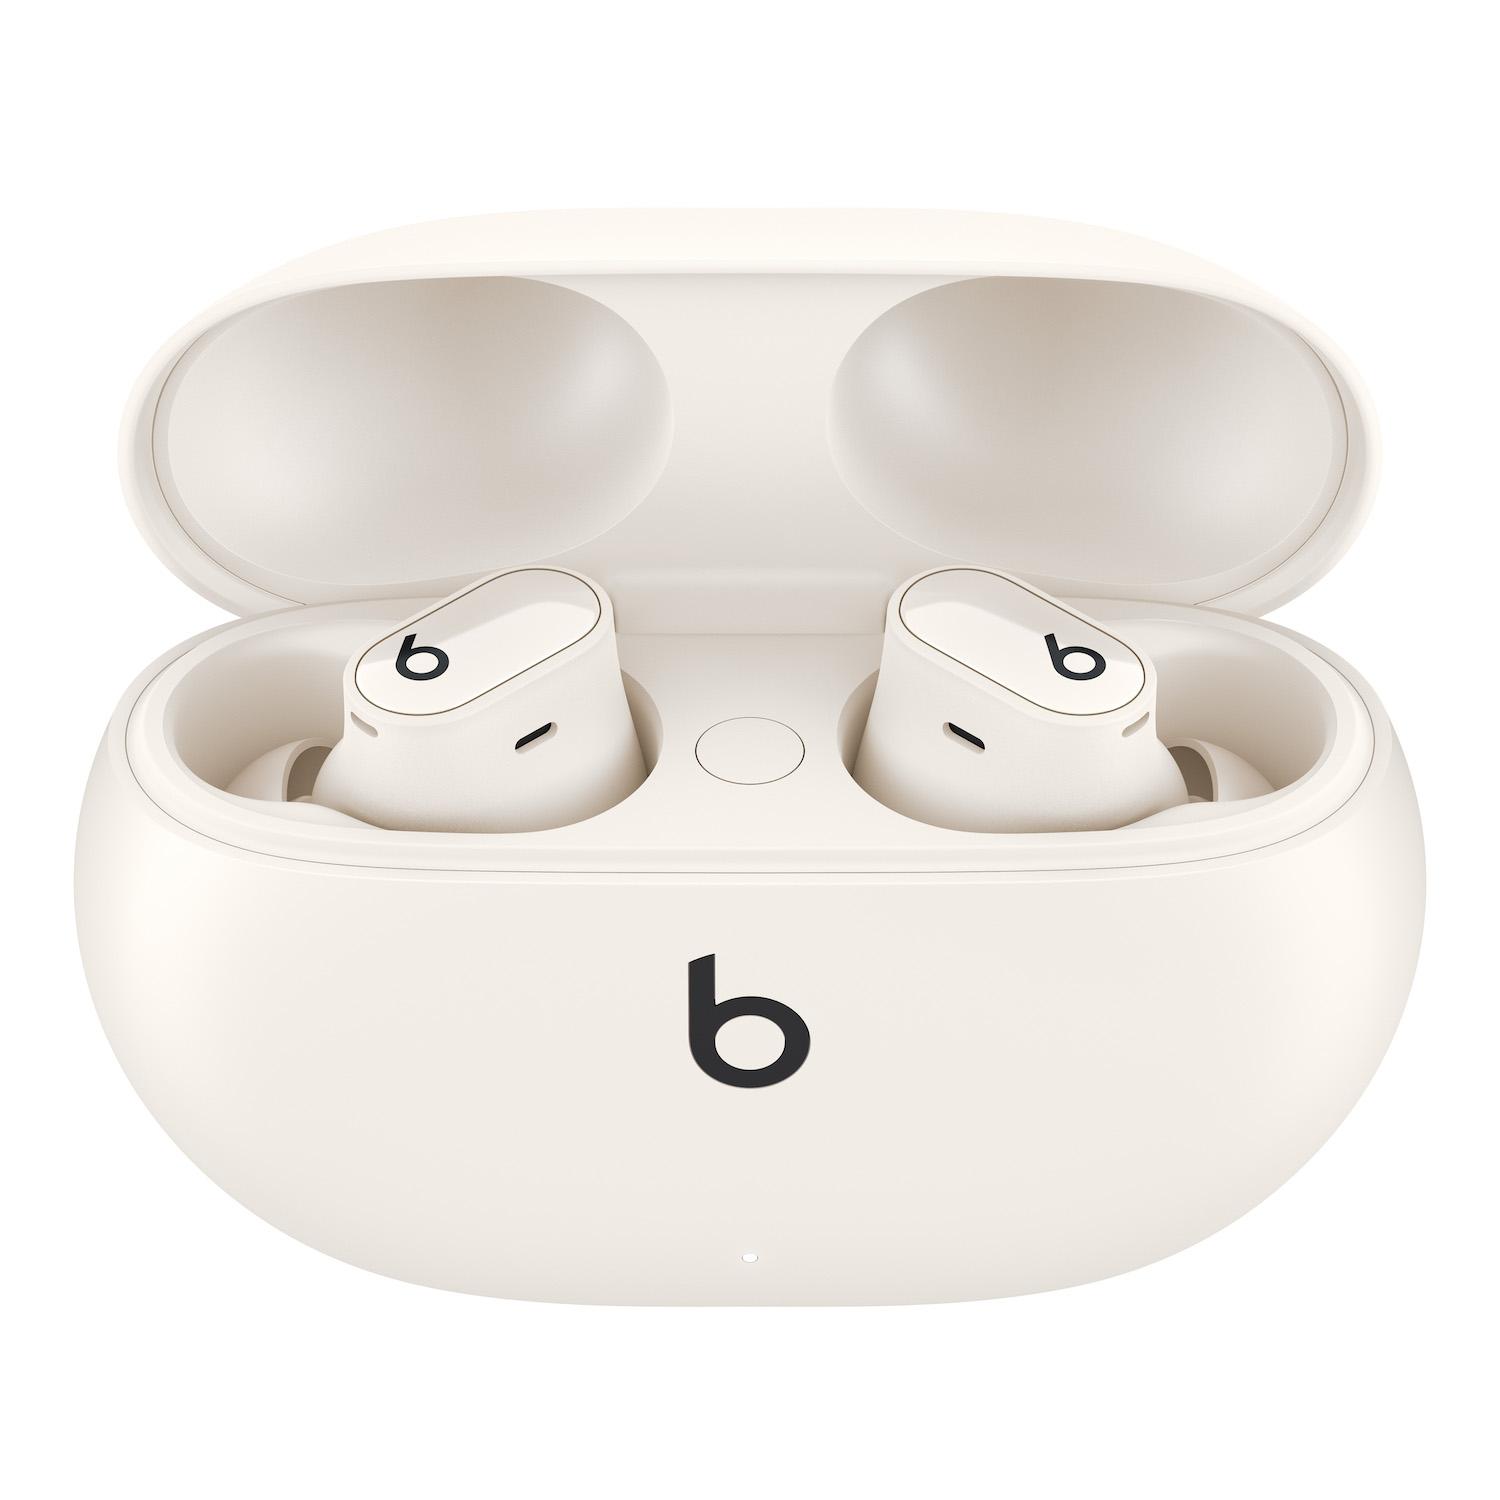 BEATS Studio Buds S Wireless Bluetooth Noise-Cancelling Earbuds - White, White